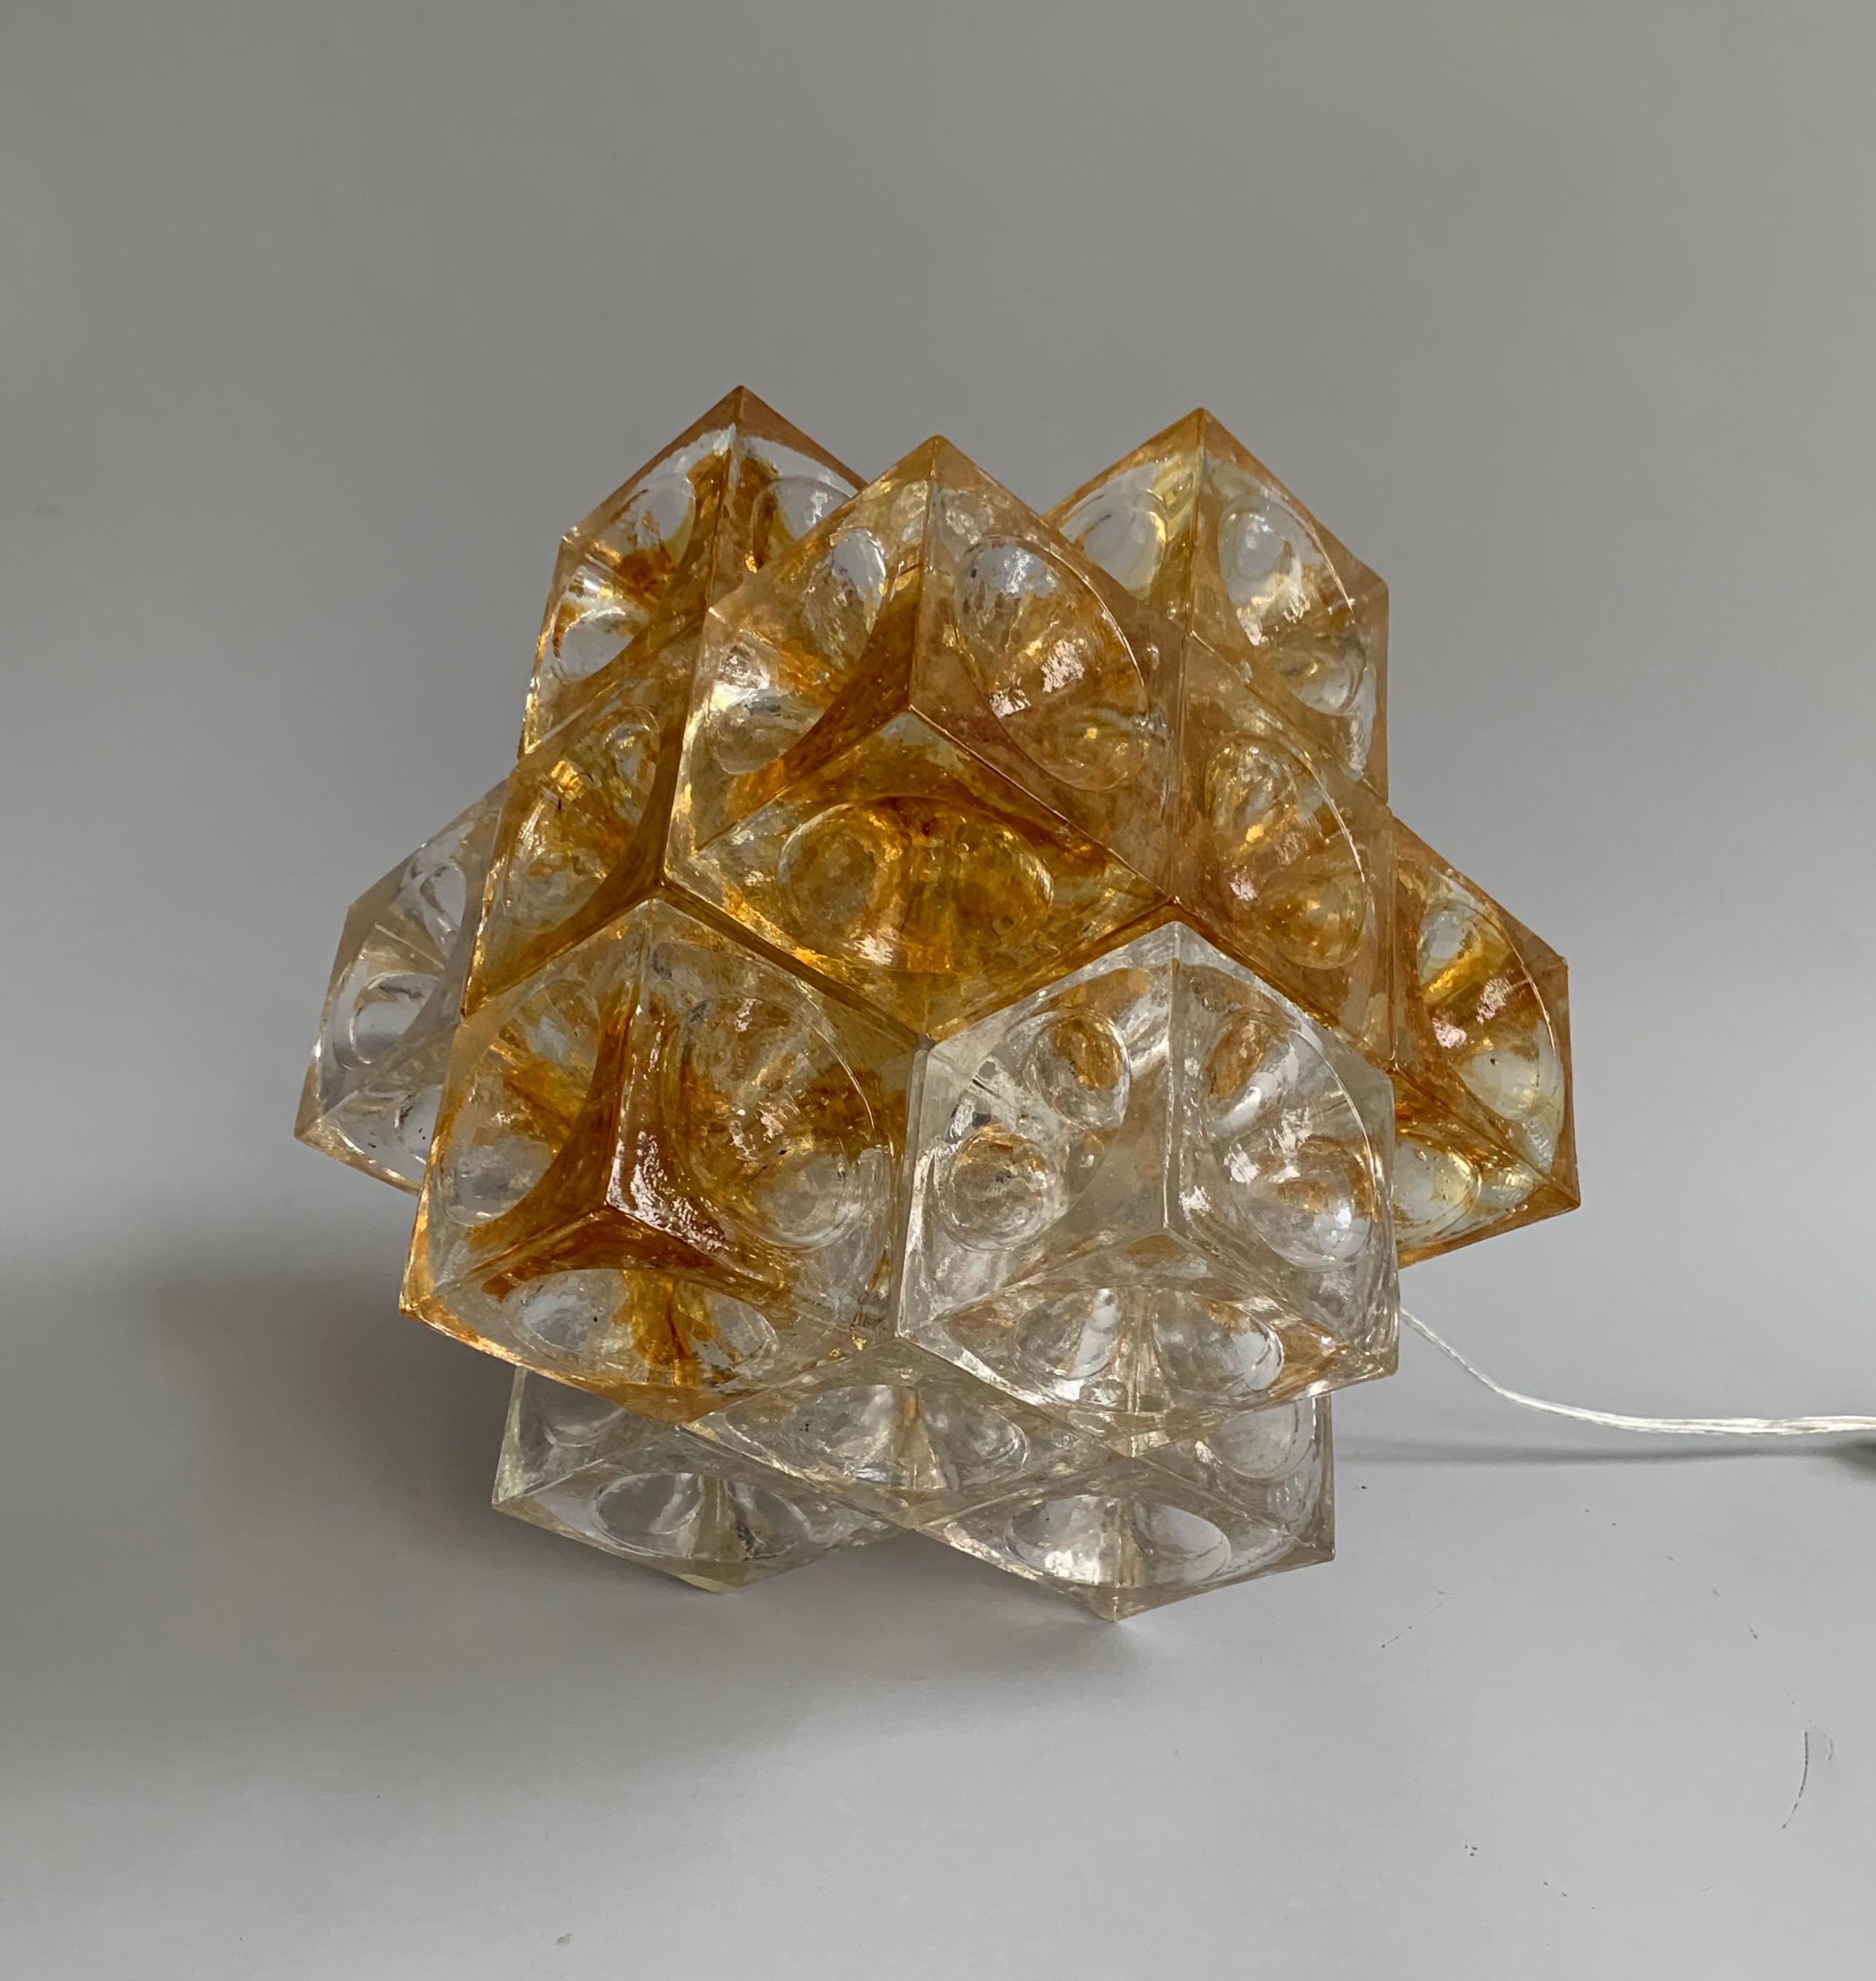 Eighteen cast glass cubes with a hemispheric grove. Internal lightbulb (75watts). Rewired with original on/off switch. This lamp is documented in an original Poliarte catalog.